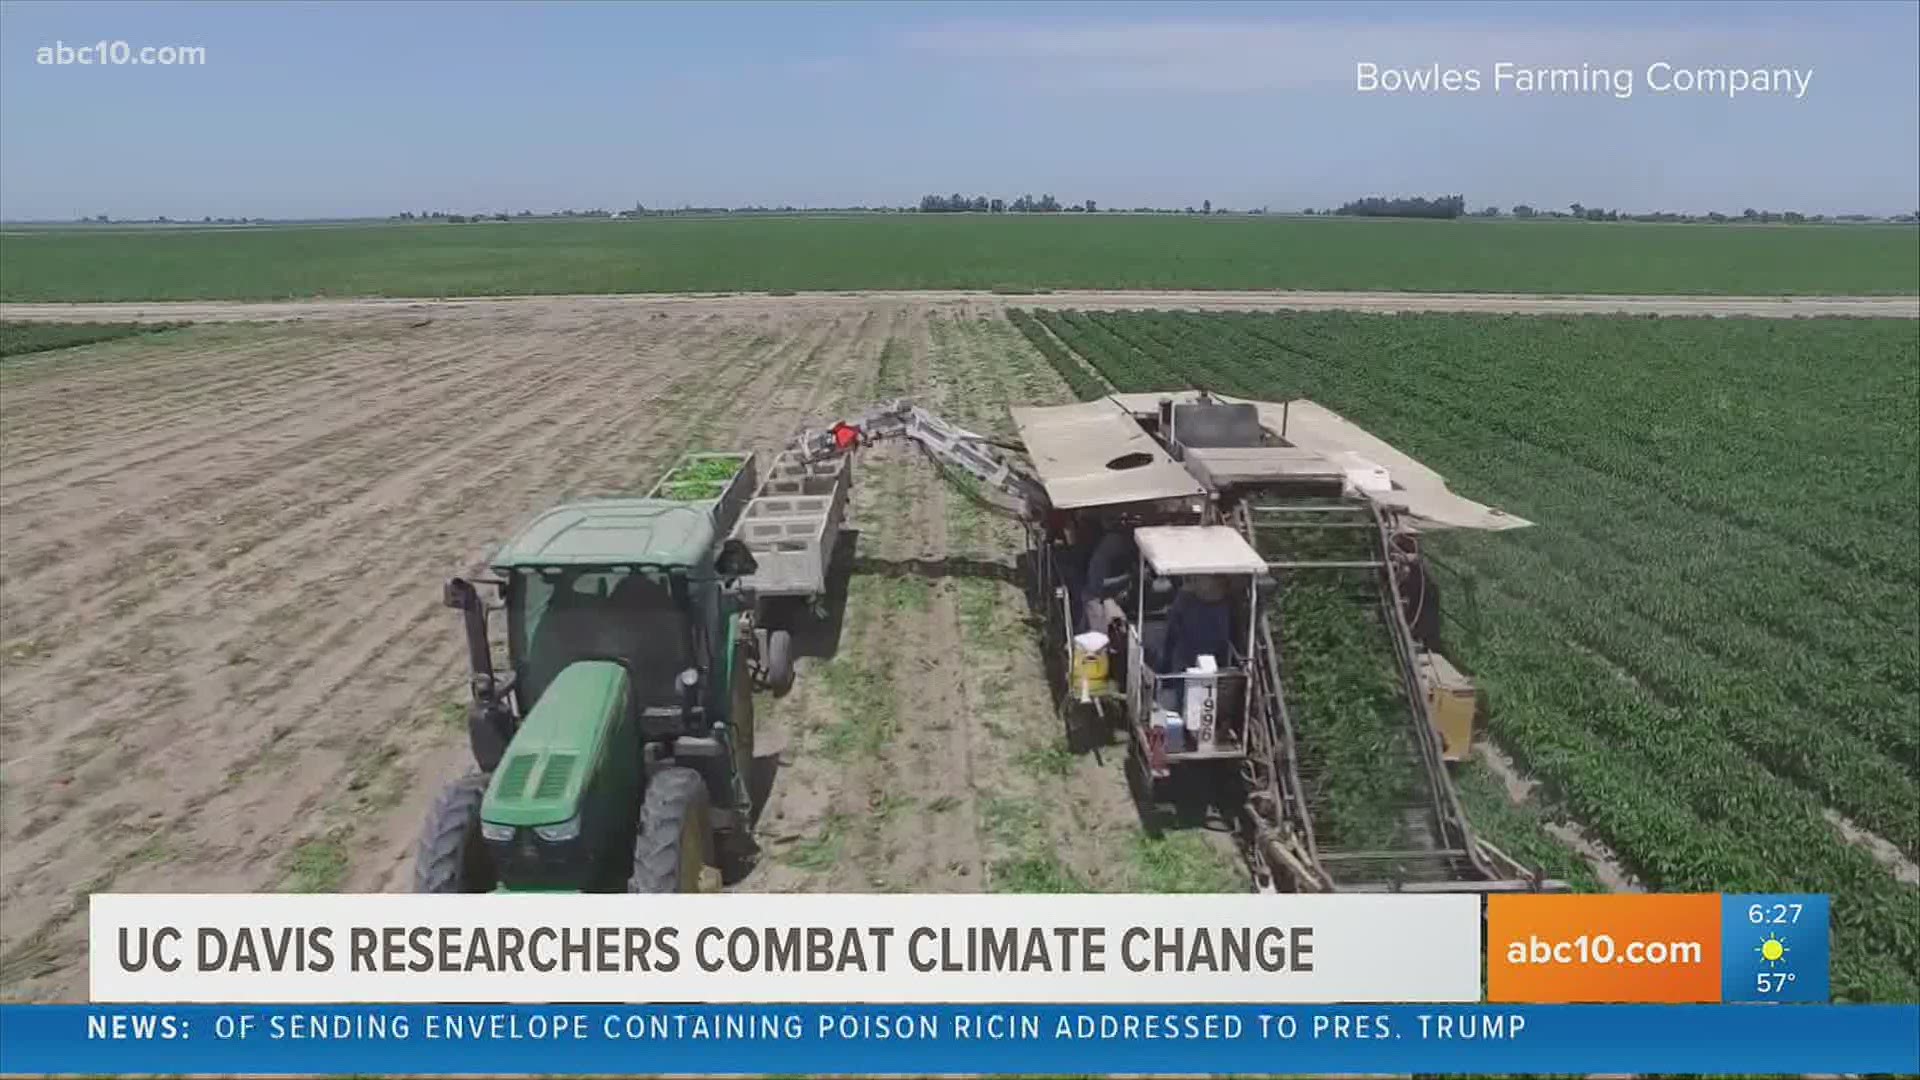 A group of researchers at UC Davis aren’t waiting for others to believe CO2 levels are rising, instead they’re working on combating climate change